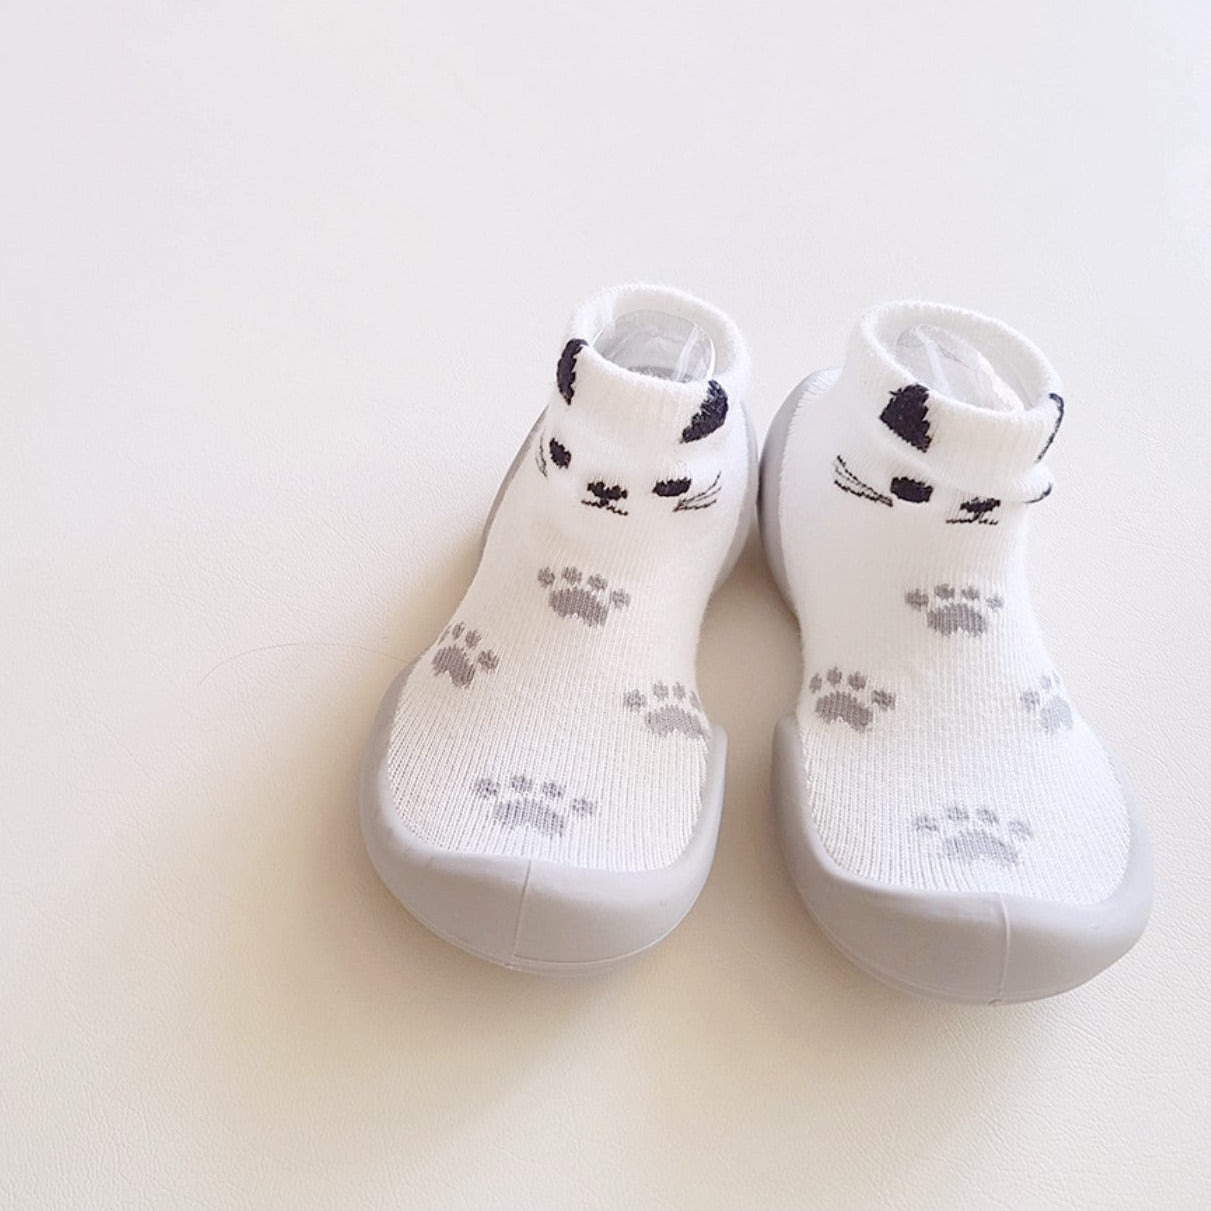 Jelly Cat Baby First Walking Shoes: Elastic baby shoes with honeycomb outsole for slip resistance. Gentle flex for delicate baby foot cartilage, lightweight design for growth and learning to walk.